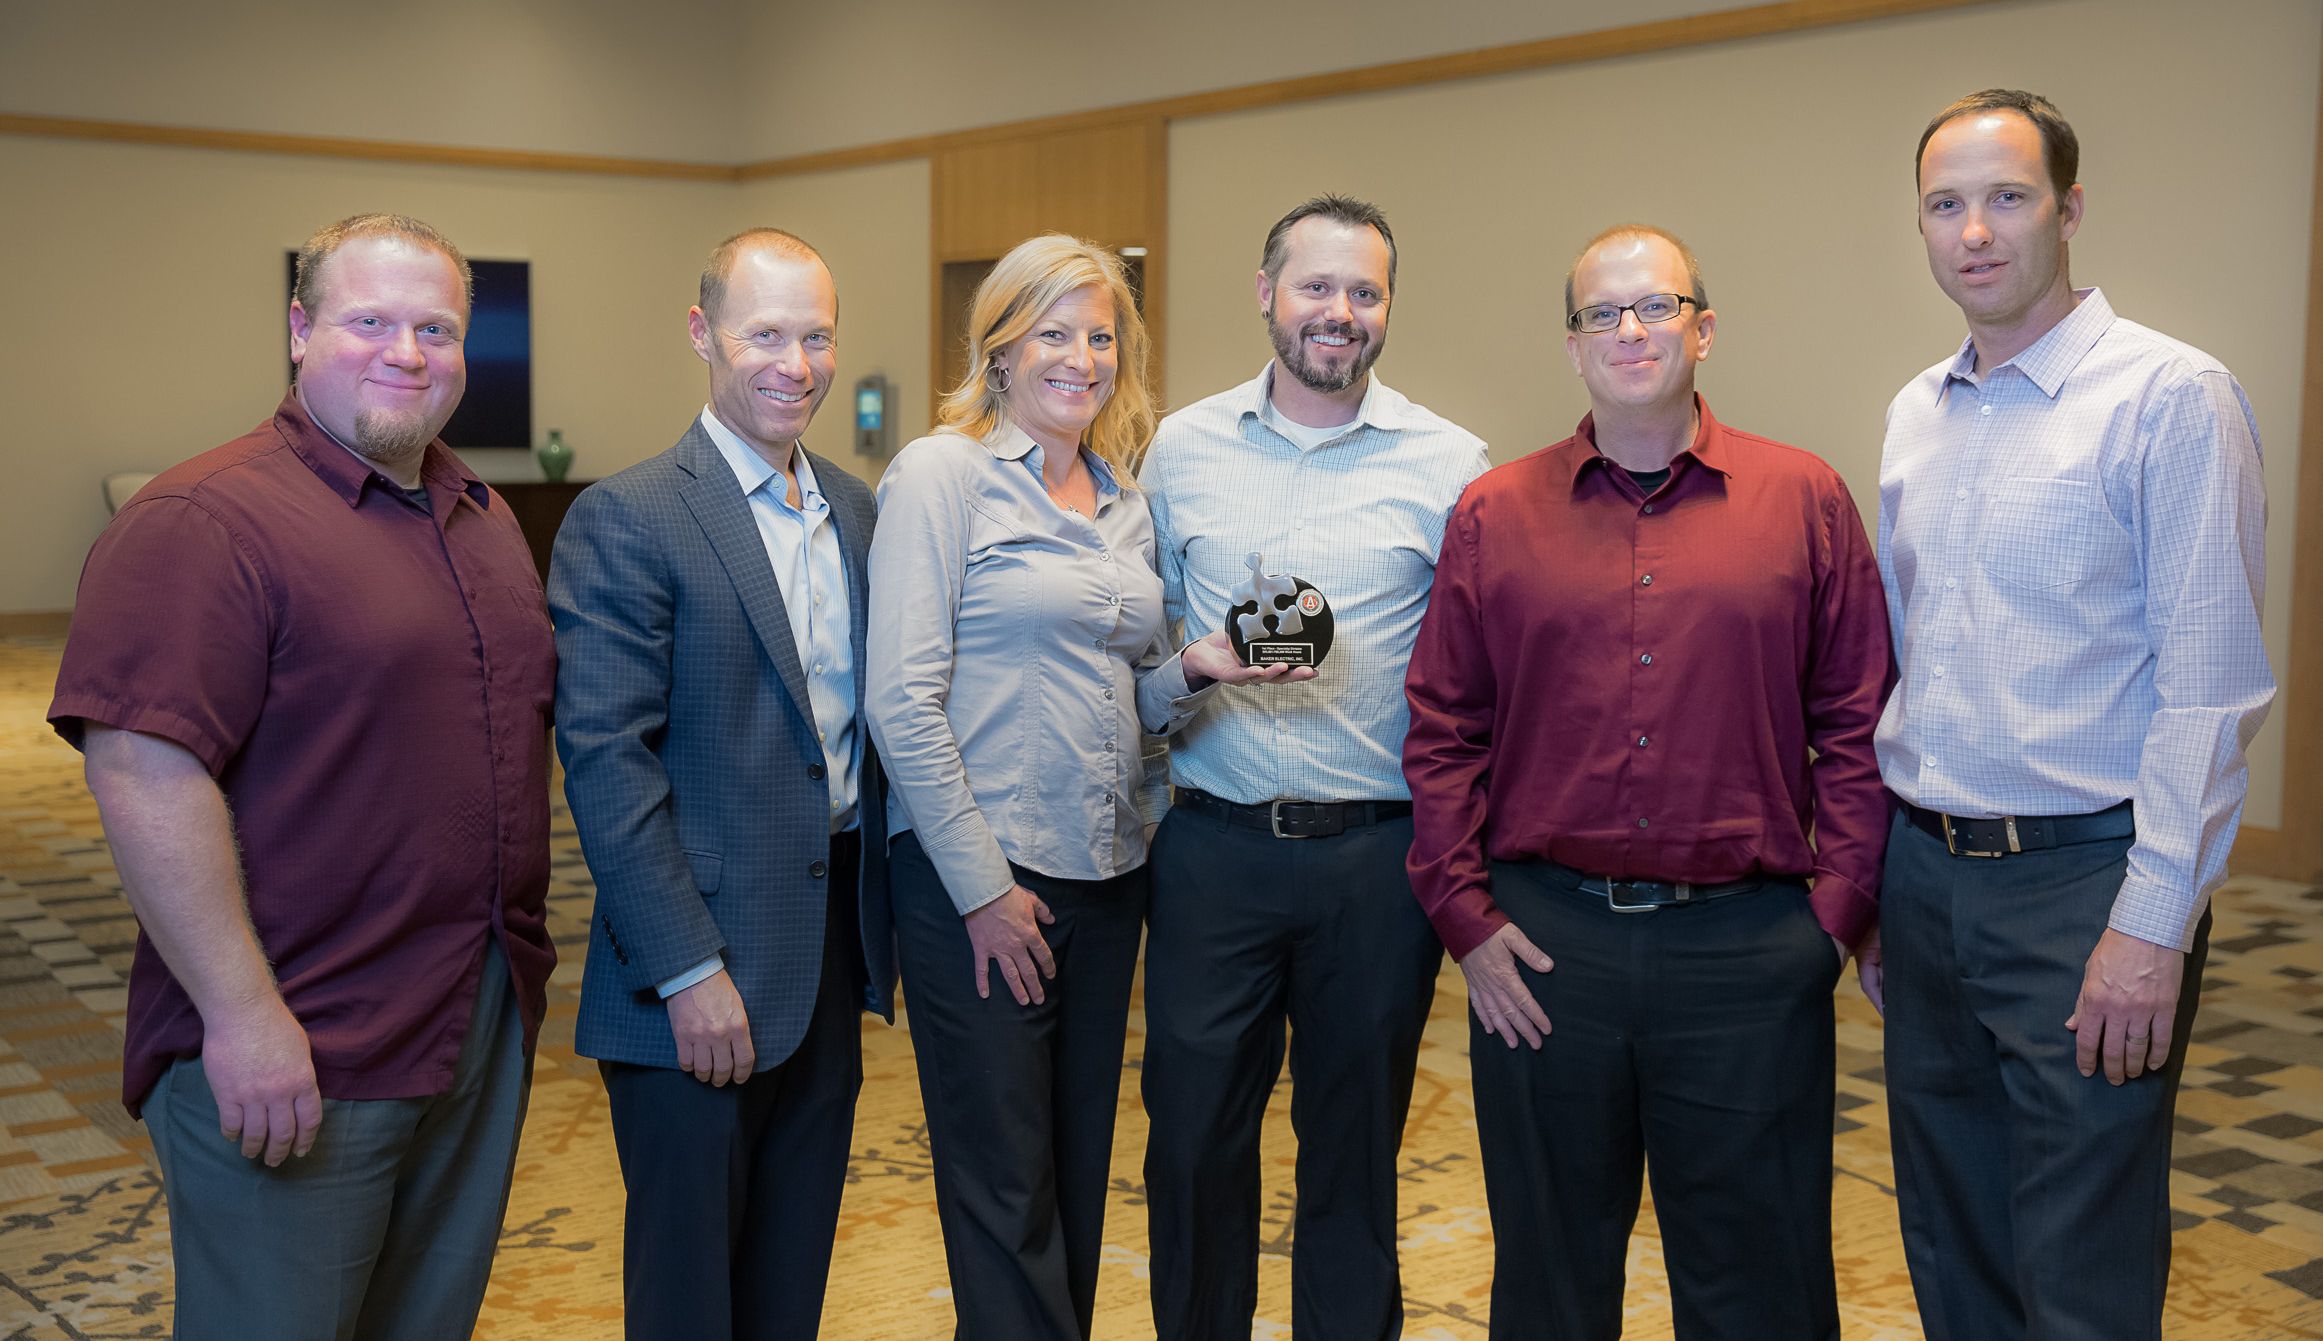 (Left to Right) Baker Electric Inc. representatives with AGC Award -- Dan Gillogly, Ted Baker, Angie McAnelly, Tim Dunbar, Brian Farr and Todd Albright.